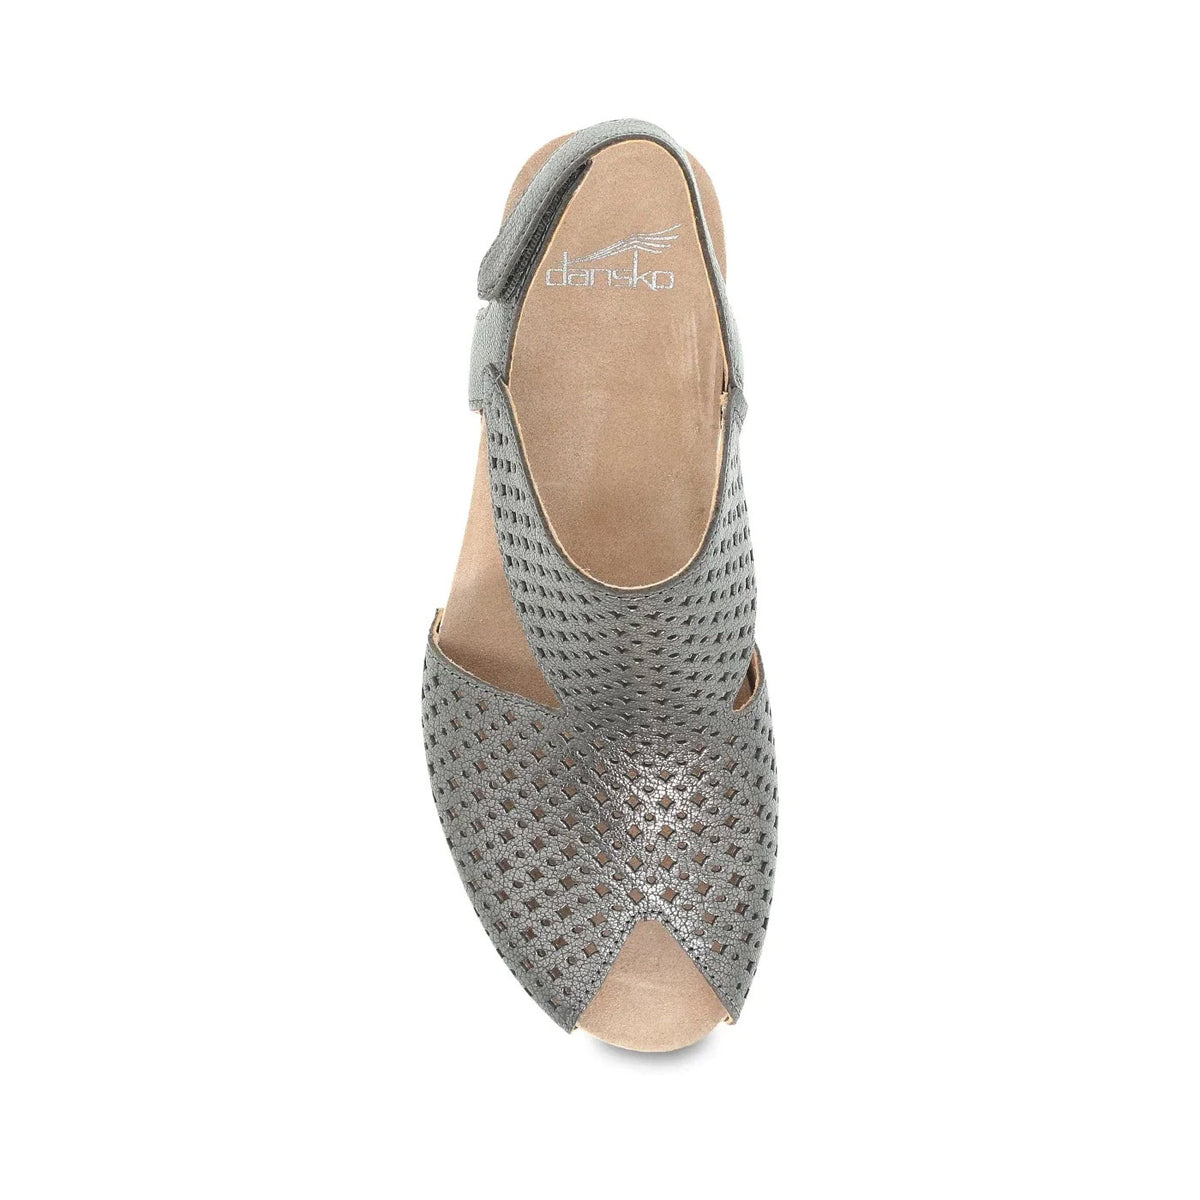 Top view of a gray, perforated women&#39;s Dansko Teagan Gunmetal Metallic sandal with a t-strap design and an open toe, isolated on a white background.